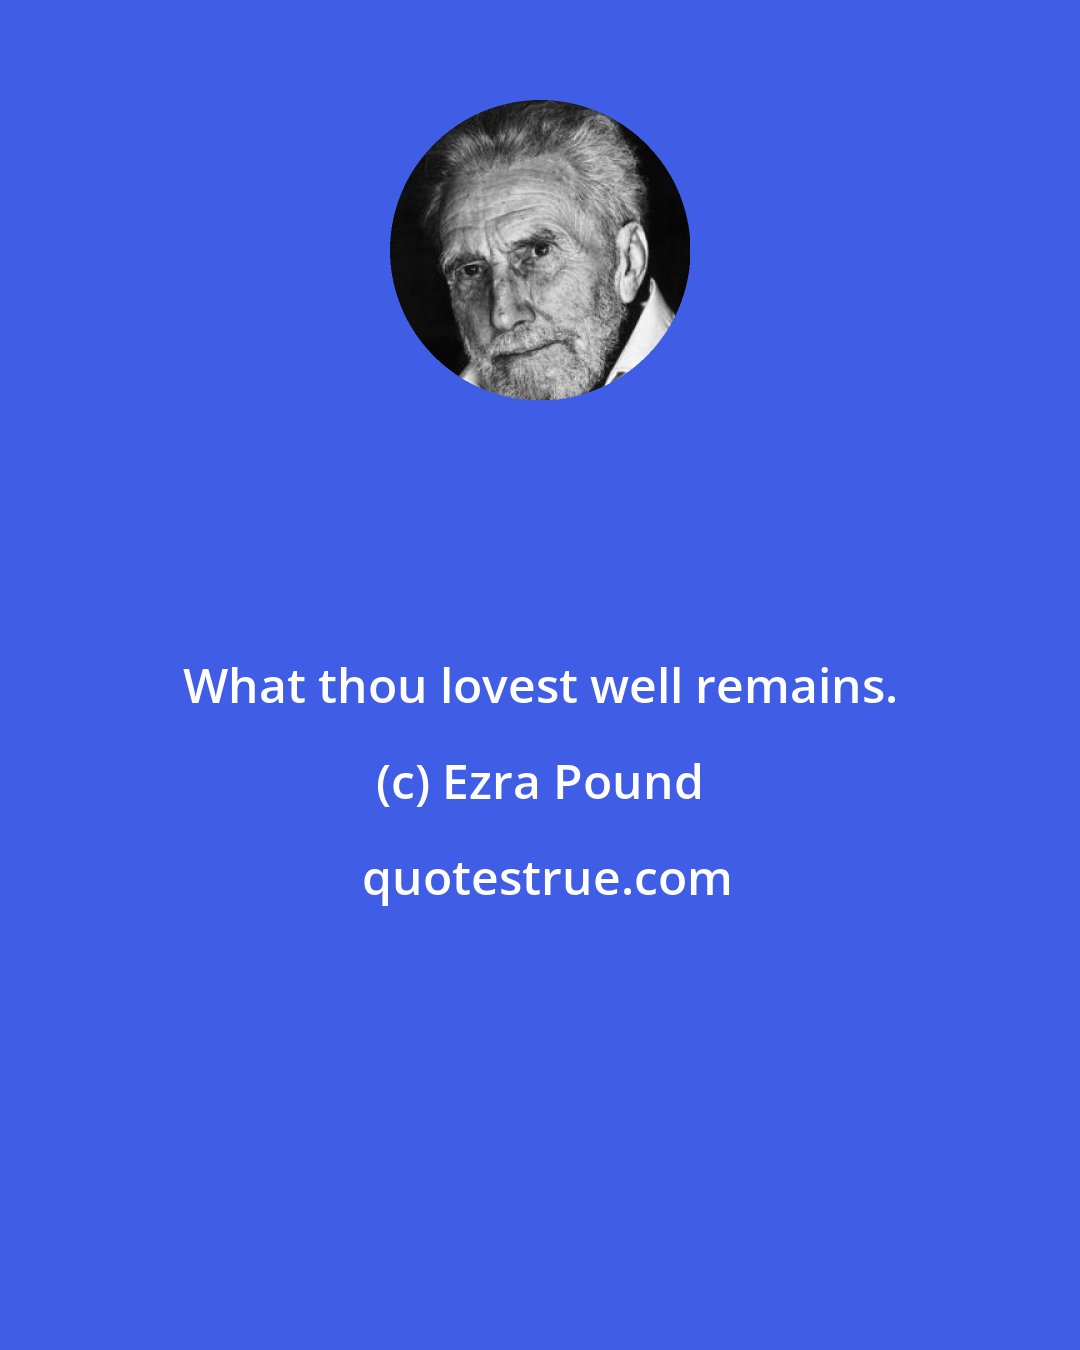 Ezra Pound: What thou lovest well remains.